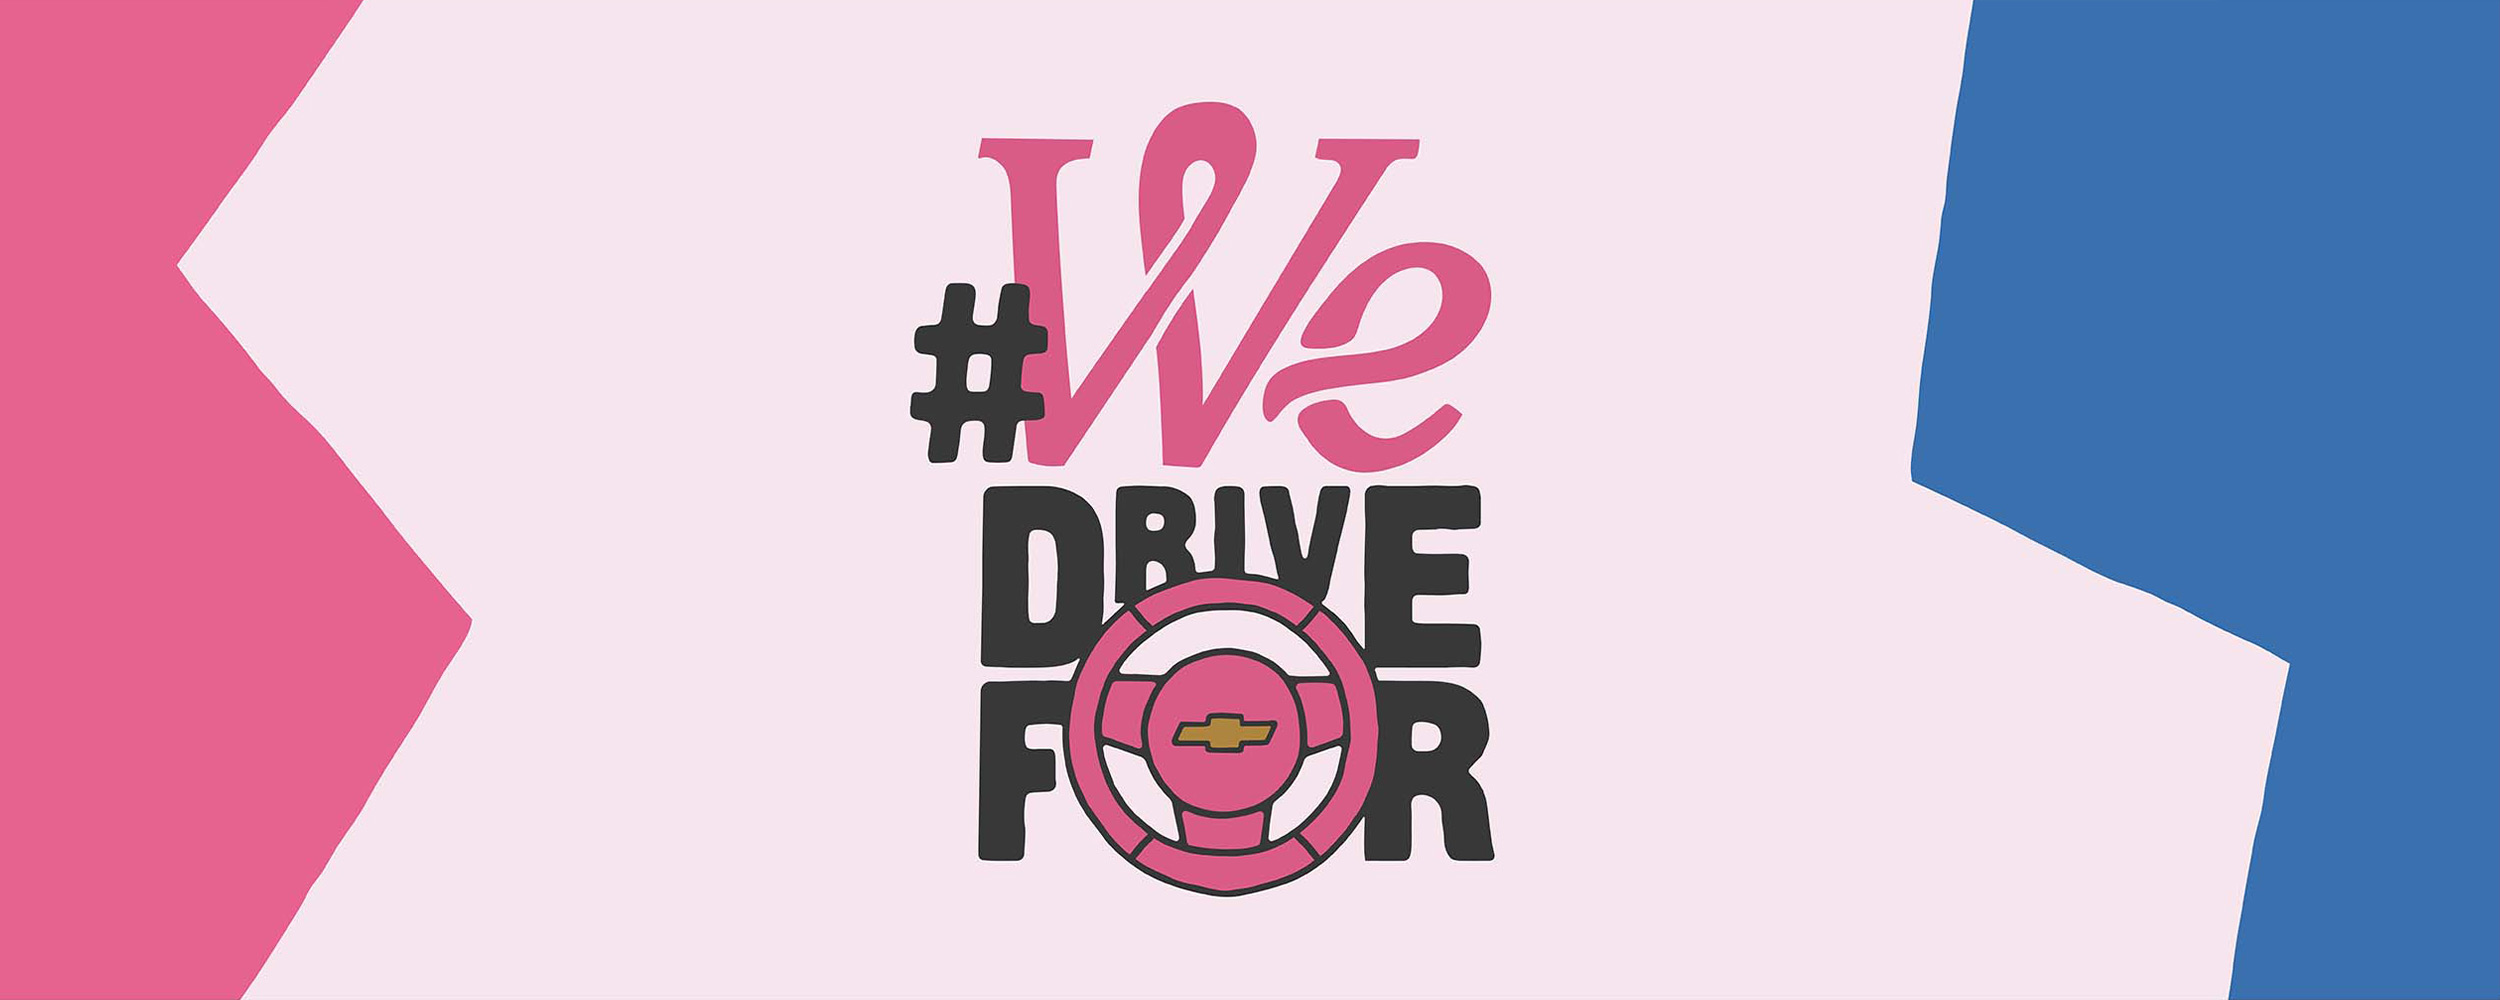 When we drive together, we can make a difference.